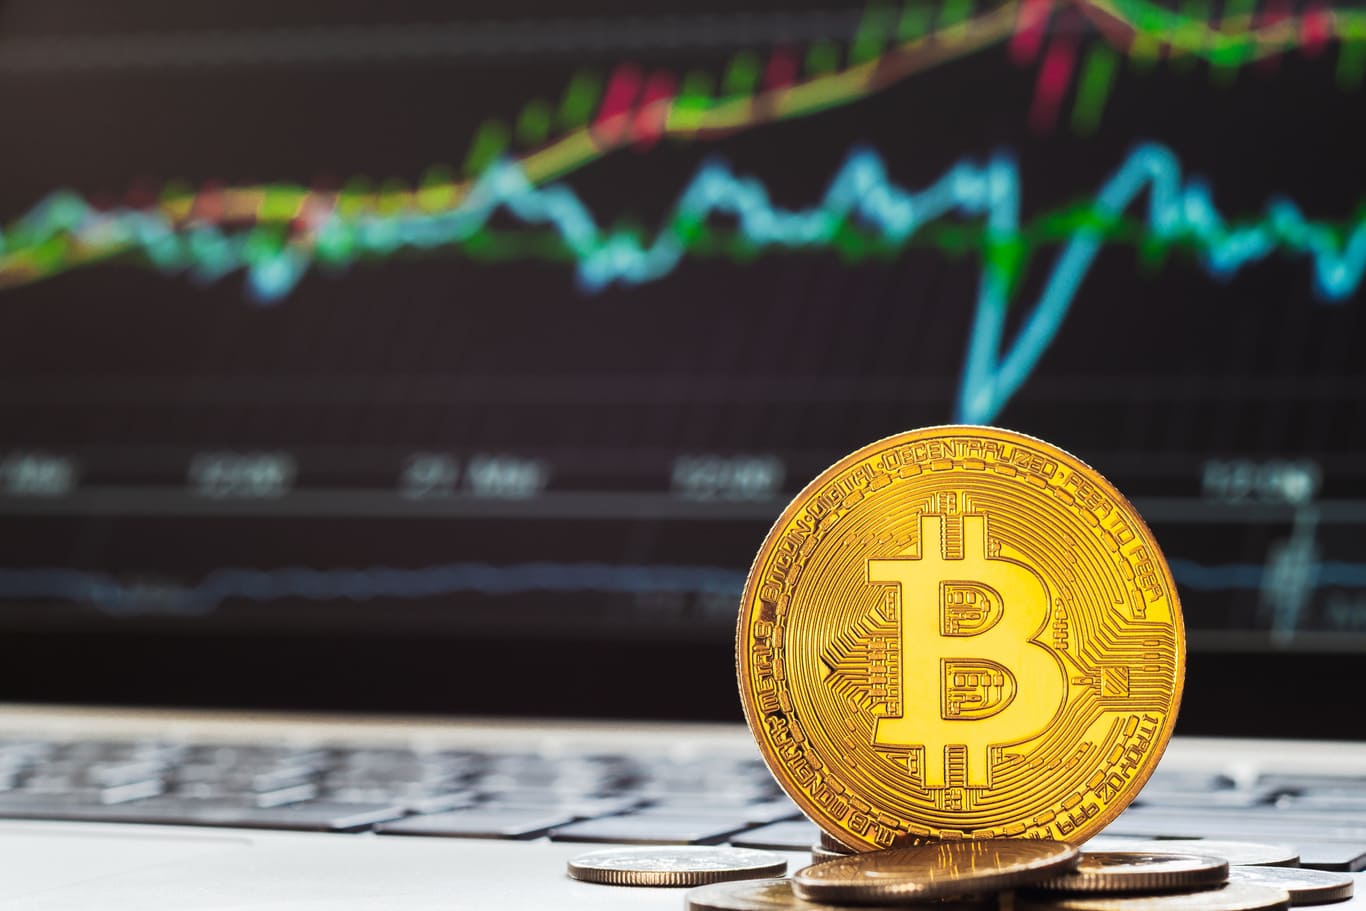 Crypto market in strong bullish price action